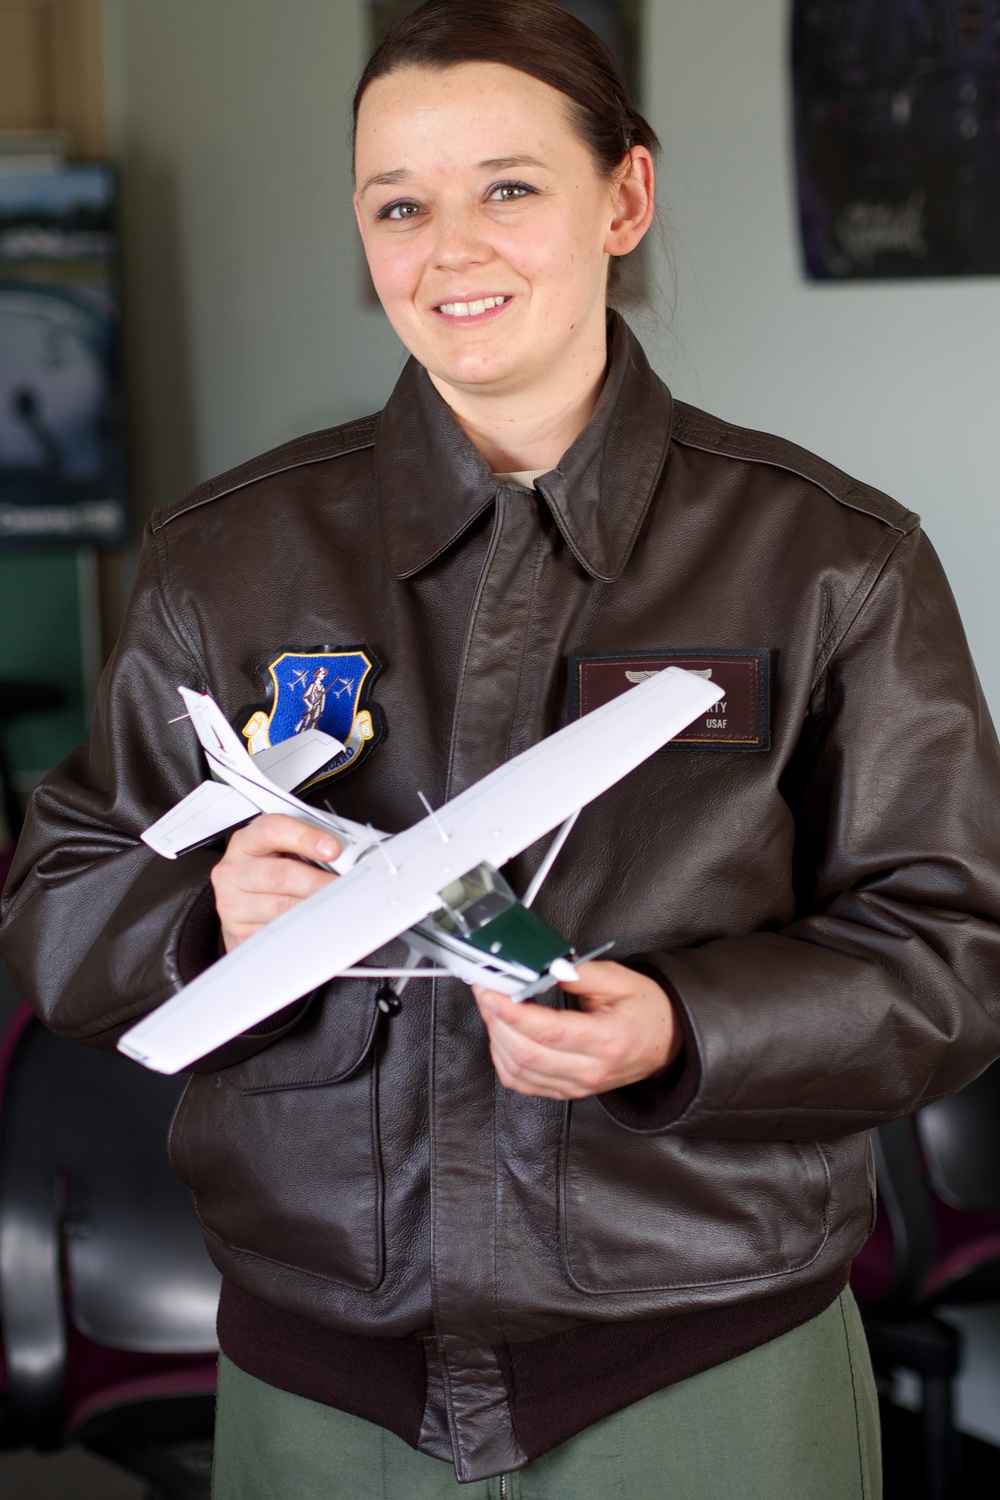 Airman goes for pilot license